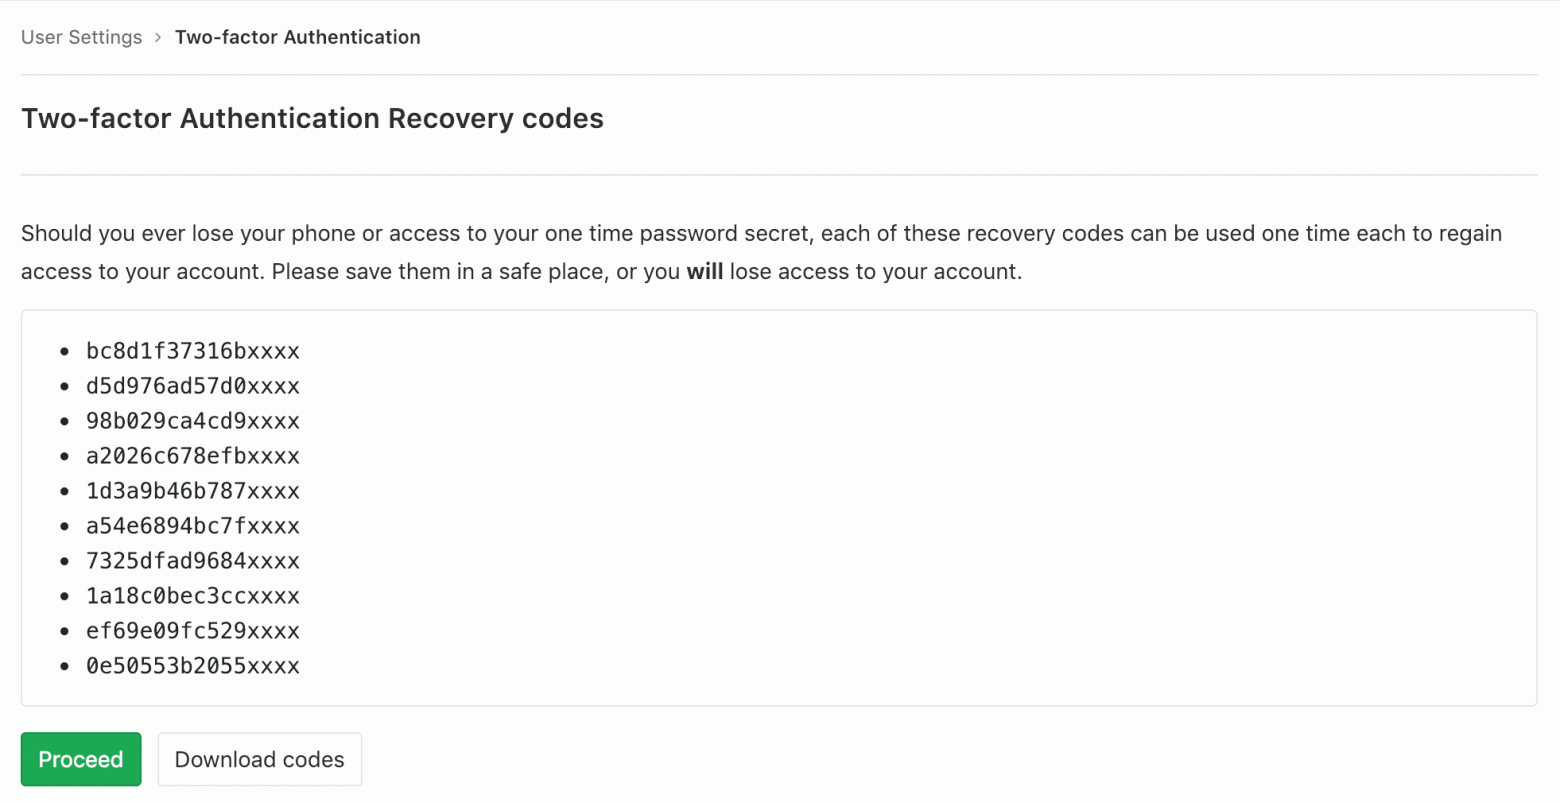 Download two-factor recovery codes